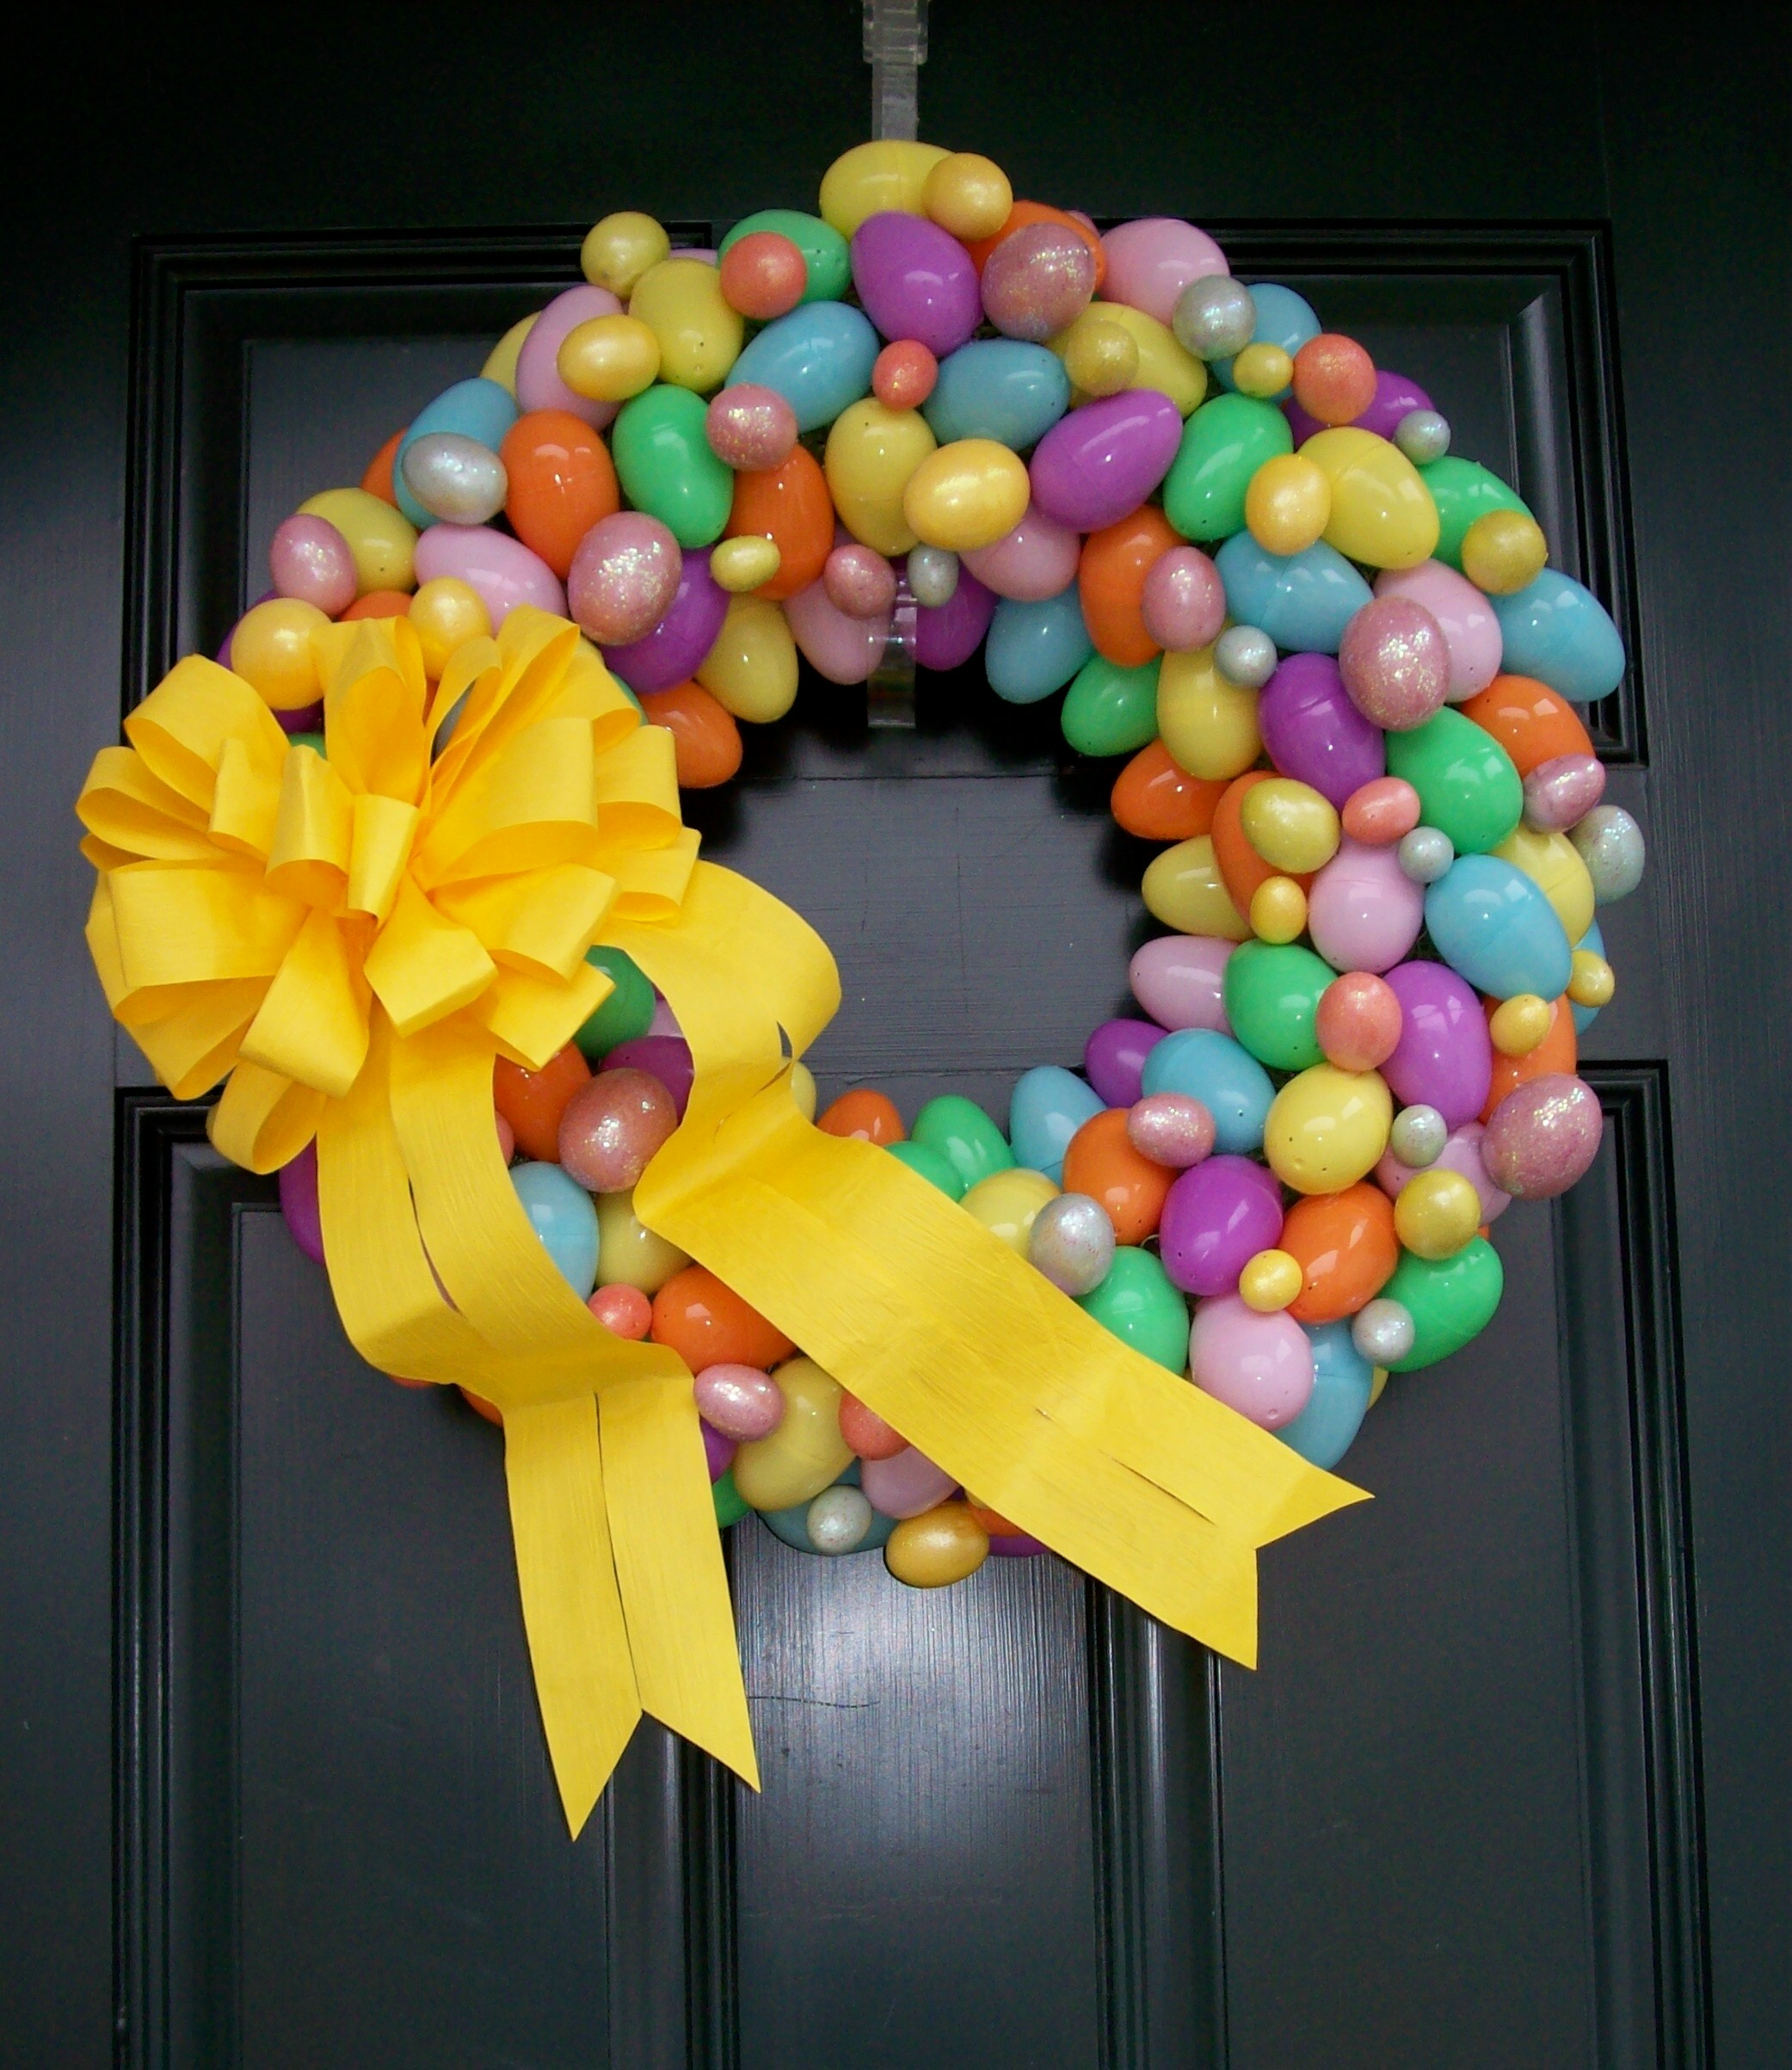 Easter egg wreath, Easter egg wreaths, wreath for Easter, Easter wreath, Easter door wreath, egg wreath, Easter decorations, Easter designs